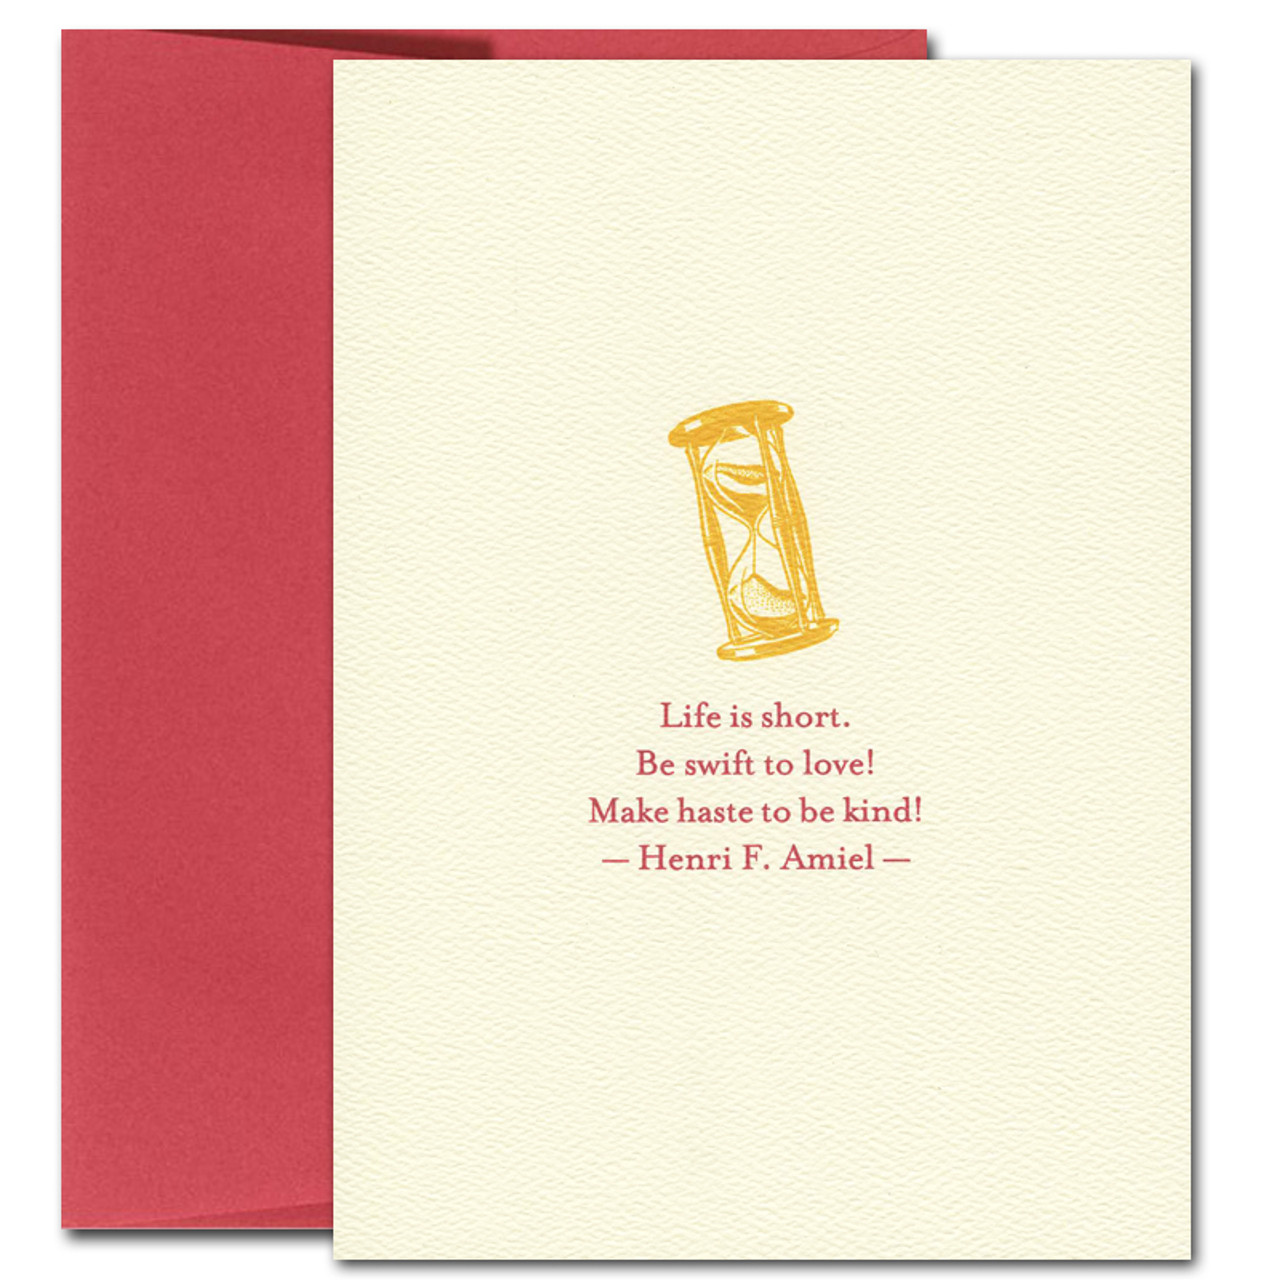 Picture of Valentine Card "Make Haste" with an illustration of an hourglass and a quotation by Henri F Amiel